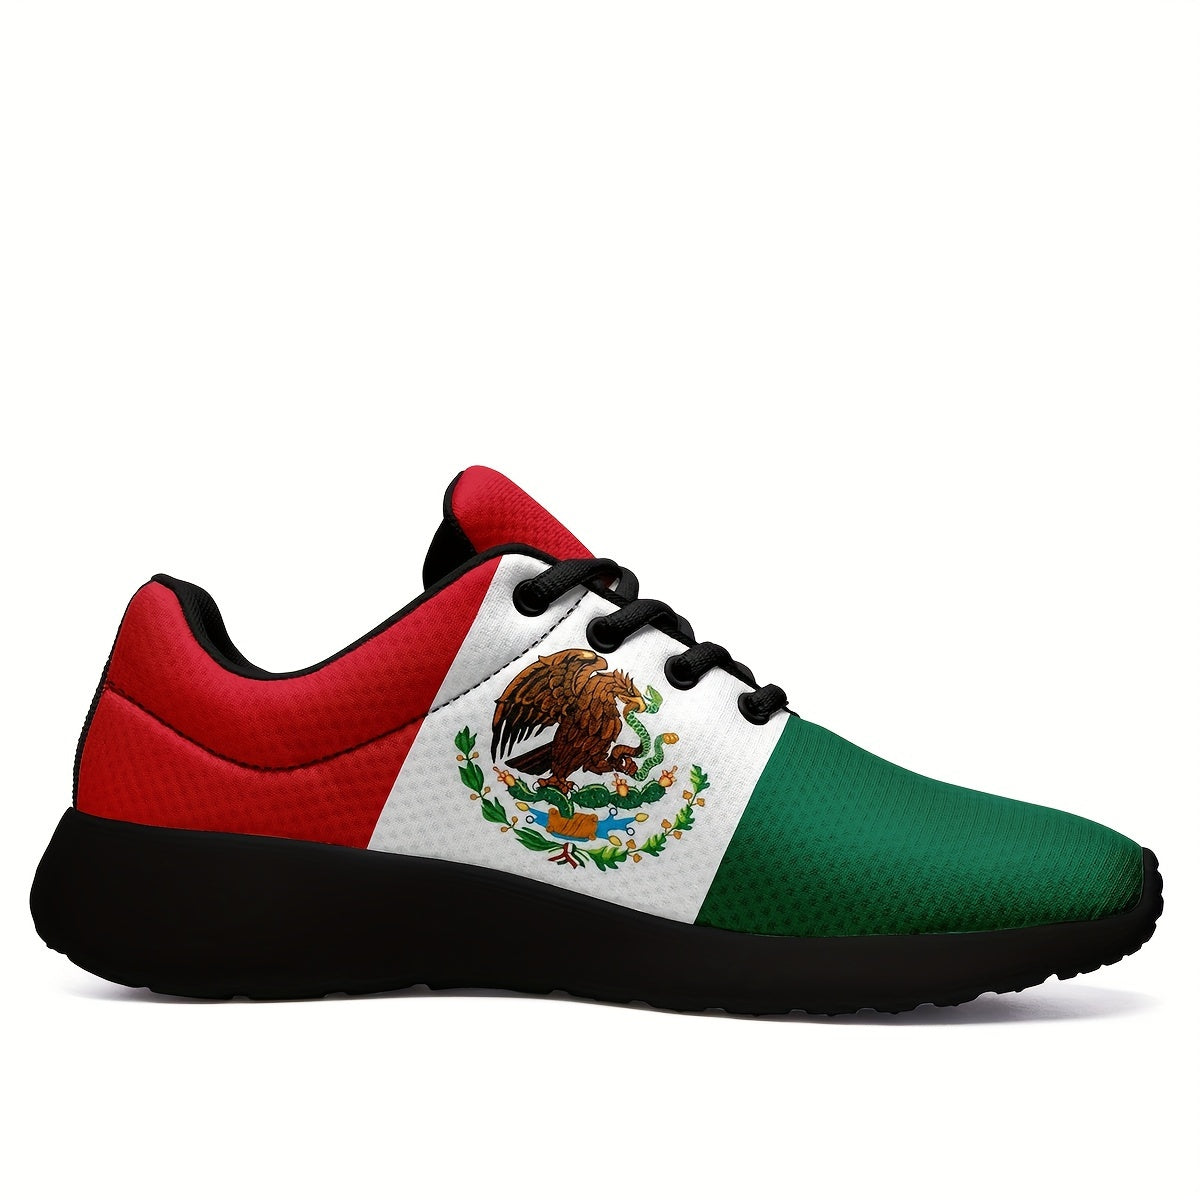 Plus Size Men's Trendy Mexico National Flag Pattern Sneakers, Comfy Non Slip Casual Soft Sole Lace Up Shoes For Men's Outdoor Activities